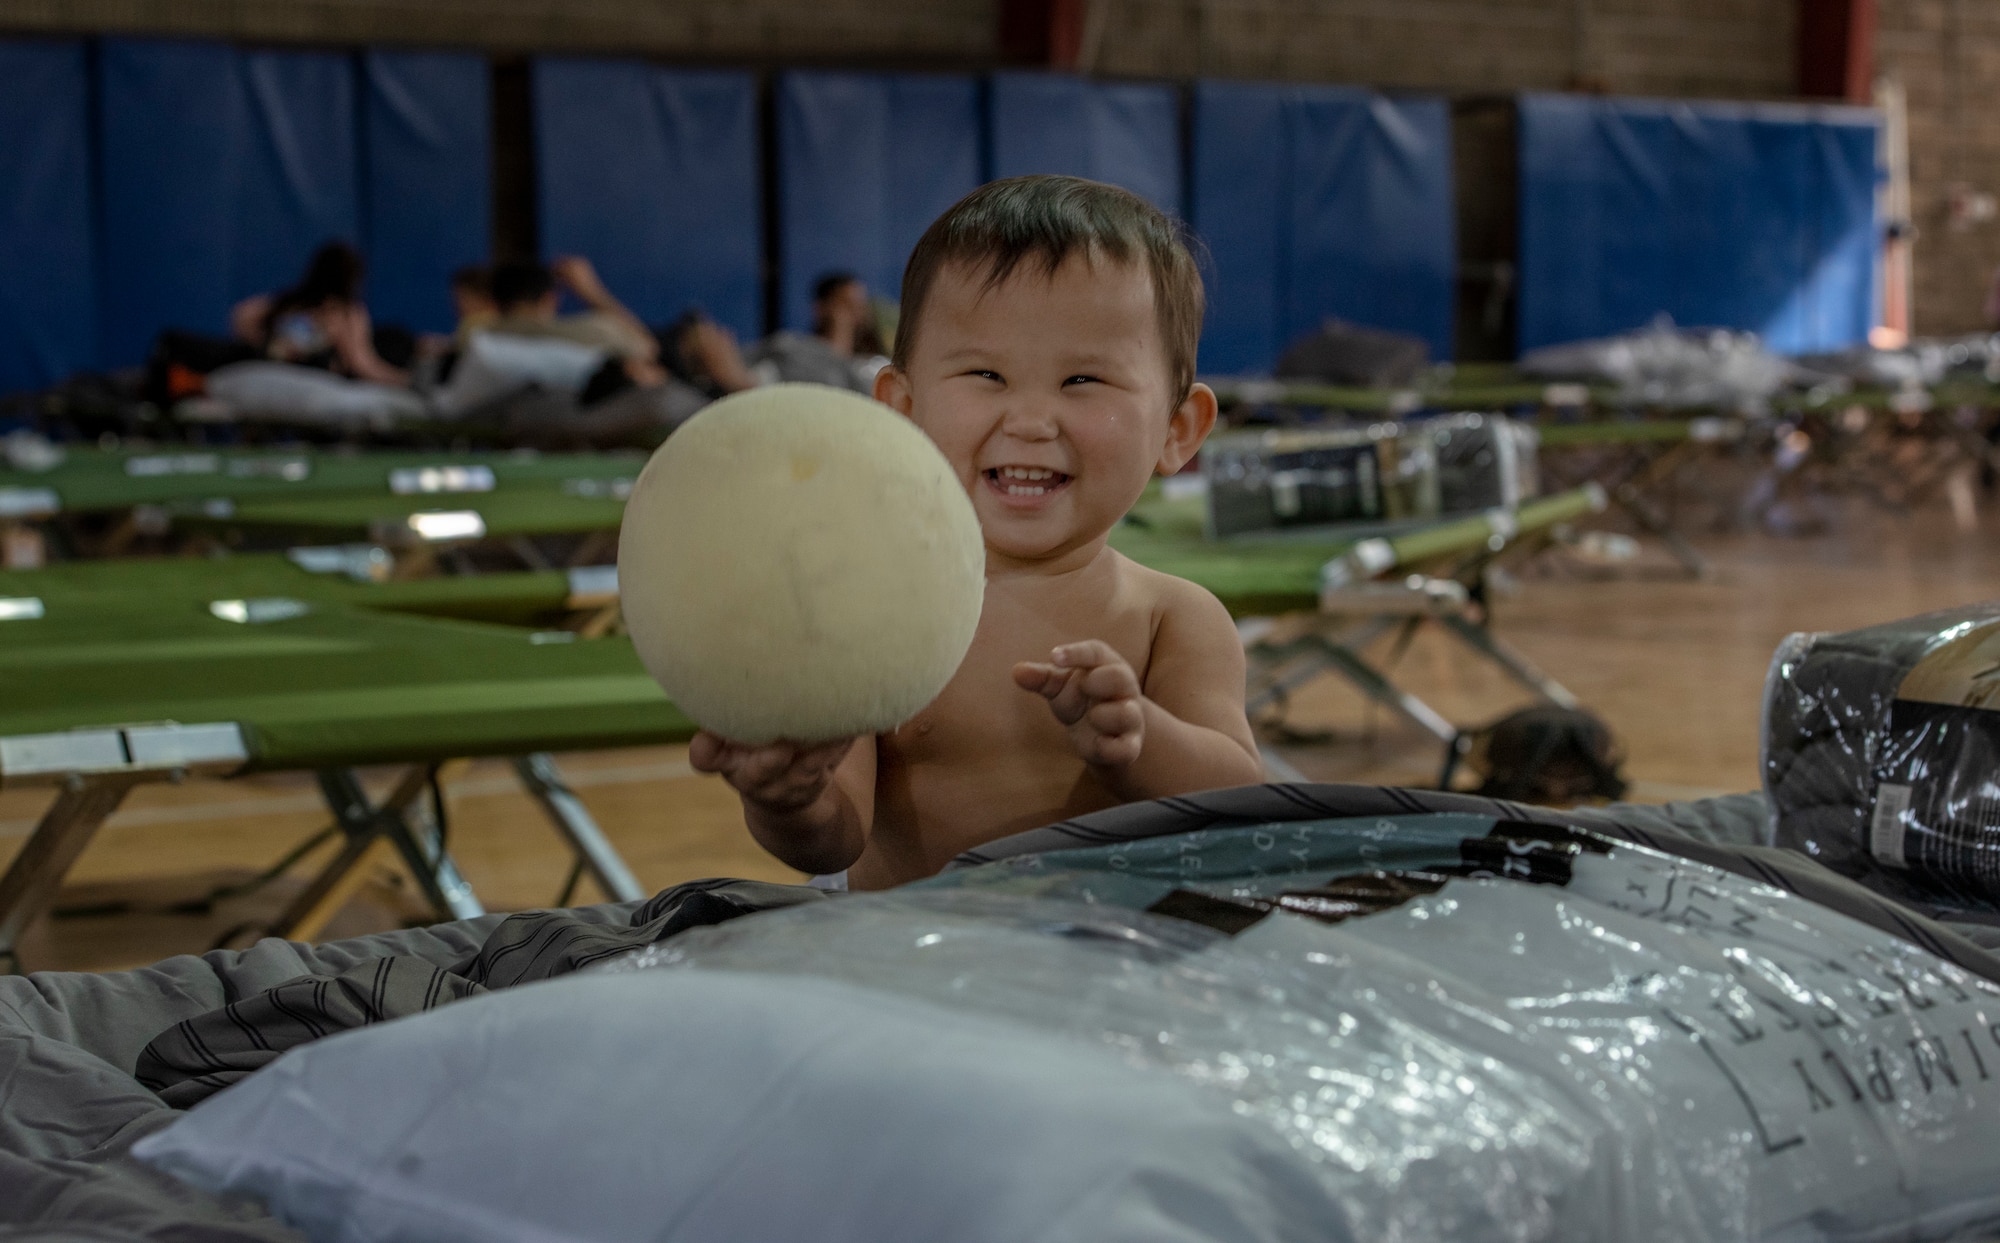 A child plays with a ball at a gym in the CENTCOM region, Aug. 20, 2021.